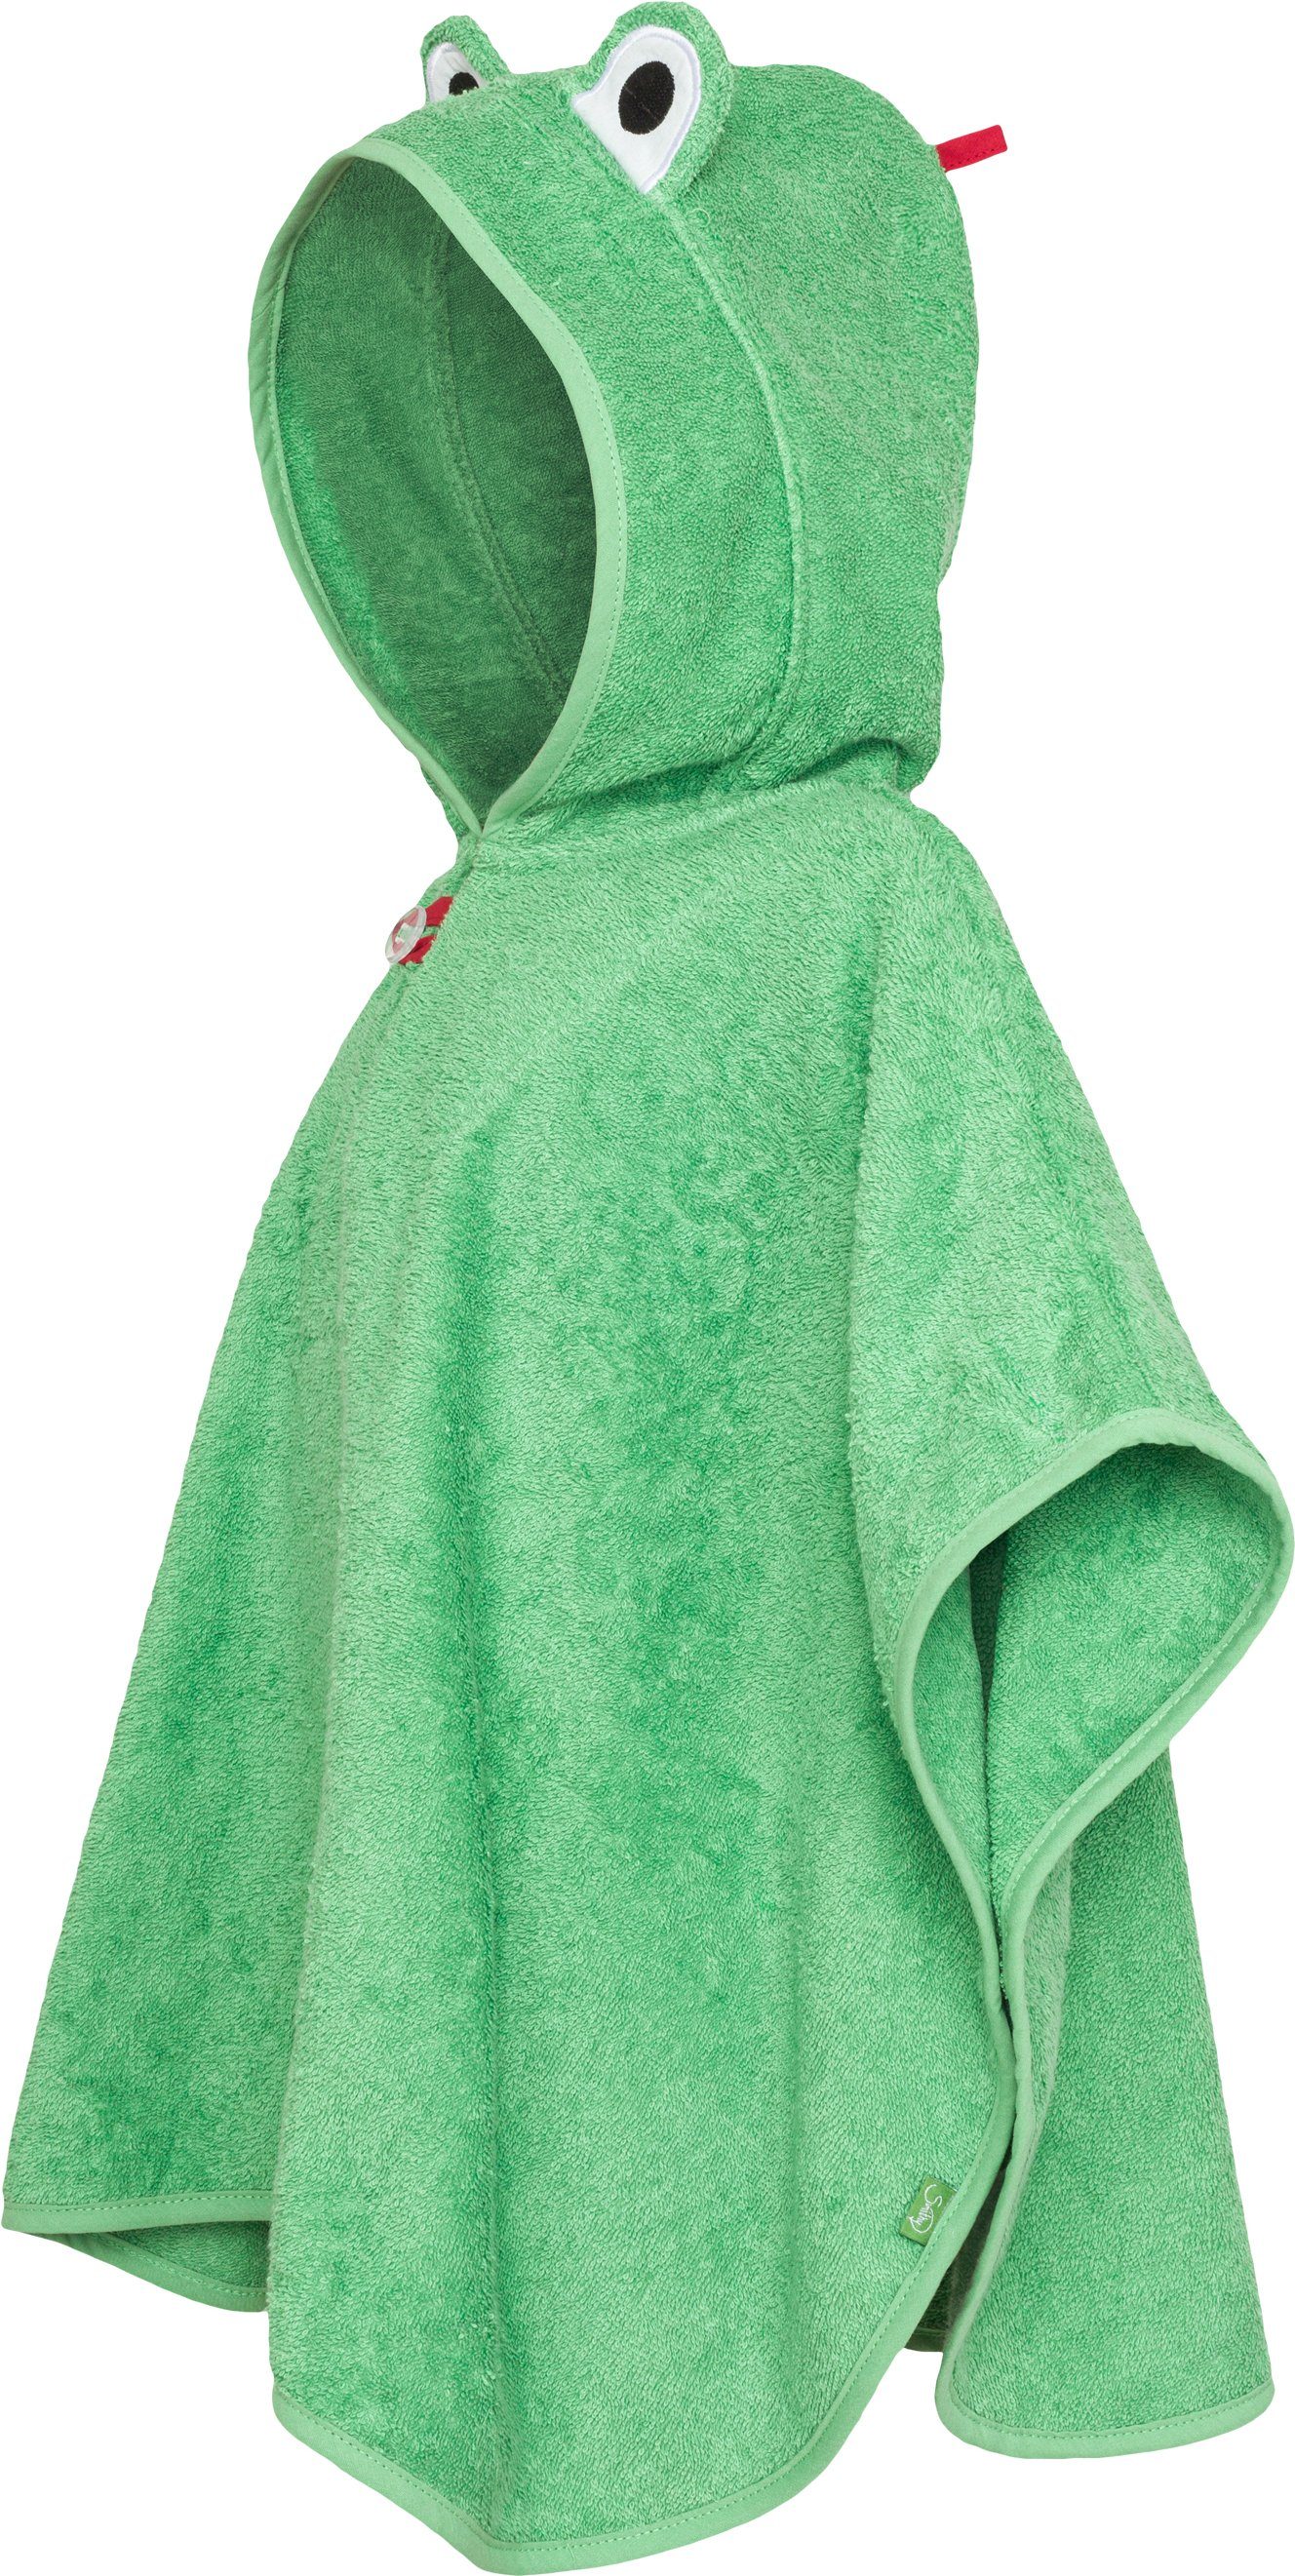 Smithy Badeponcho am Frottee, Europe grün, made Knöpfe in Armloch, Frosch, Baby Frottee